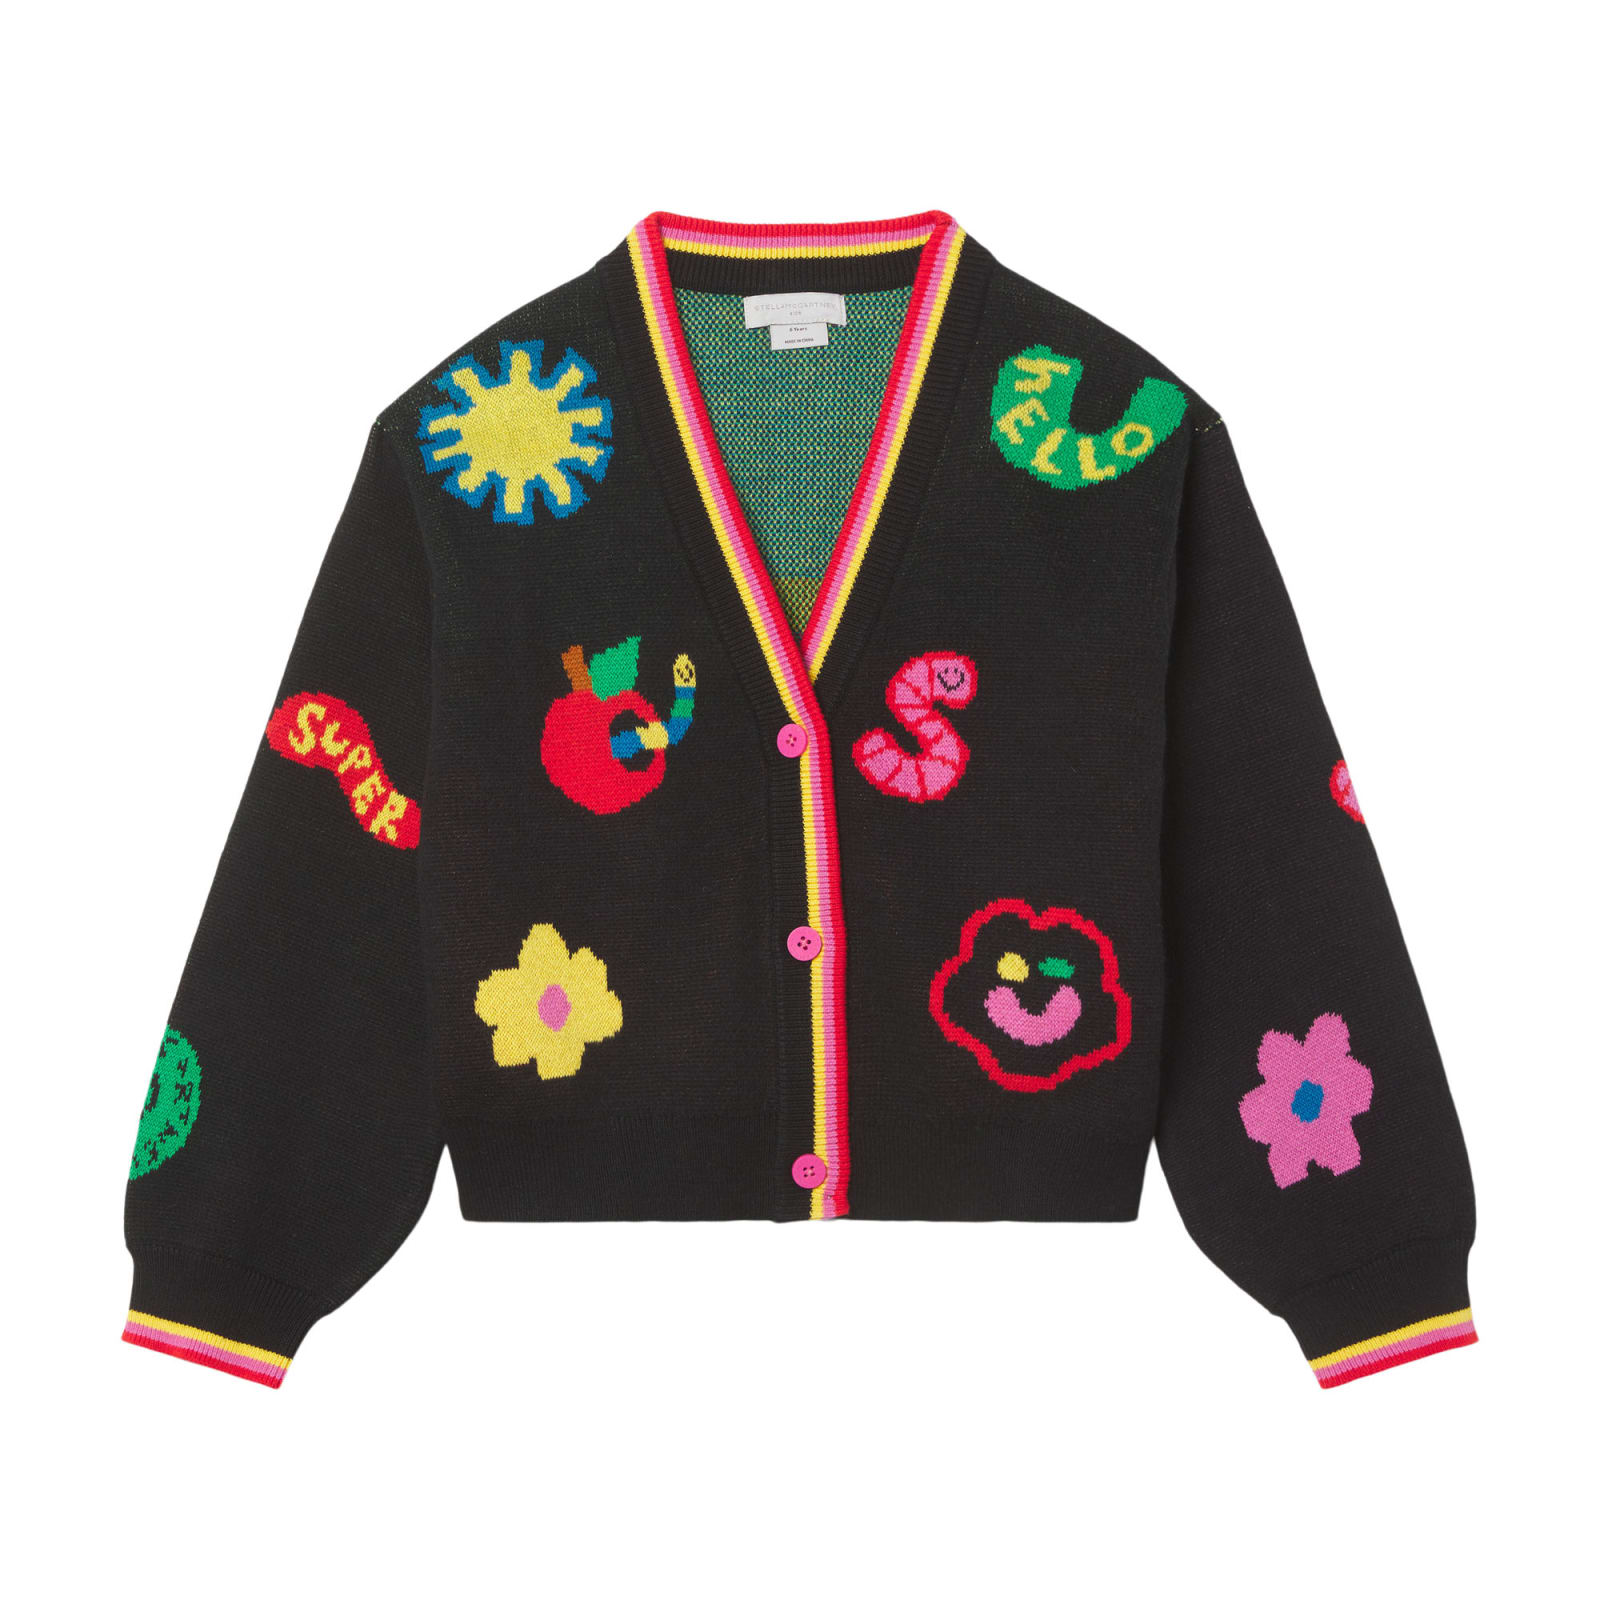 STELLA MCCARTNEY KIDS BLACK WOOL AND COTTON CARDIGAN WITH MULTICOLOR INLAYS